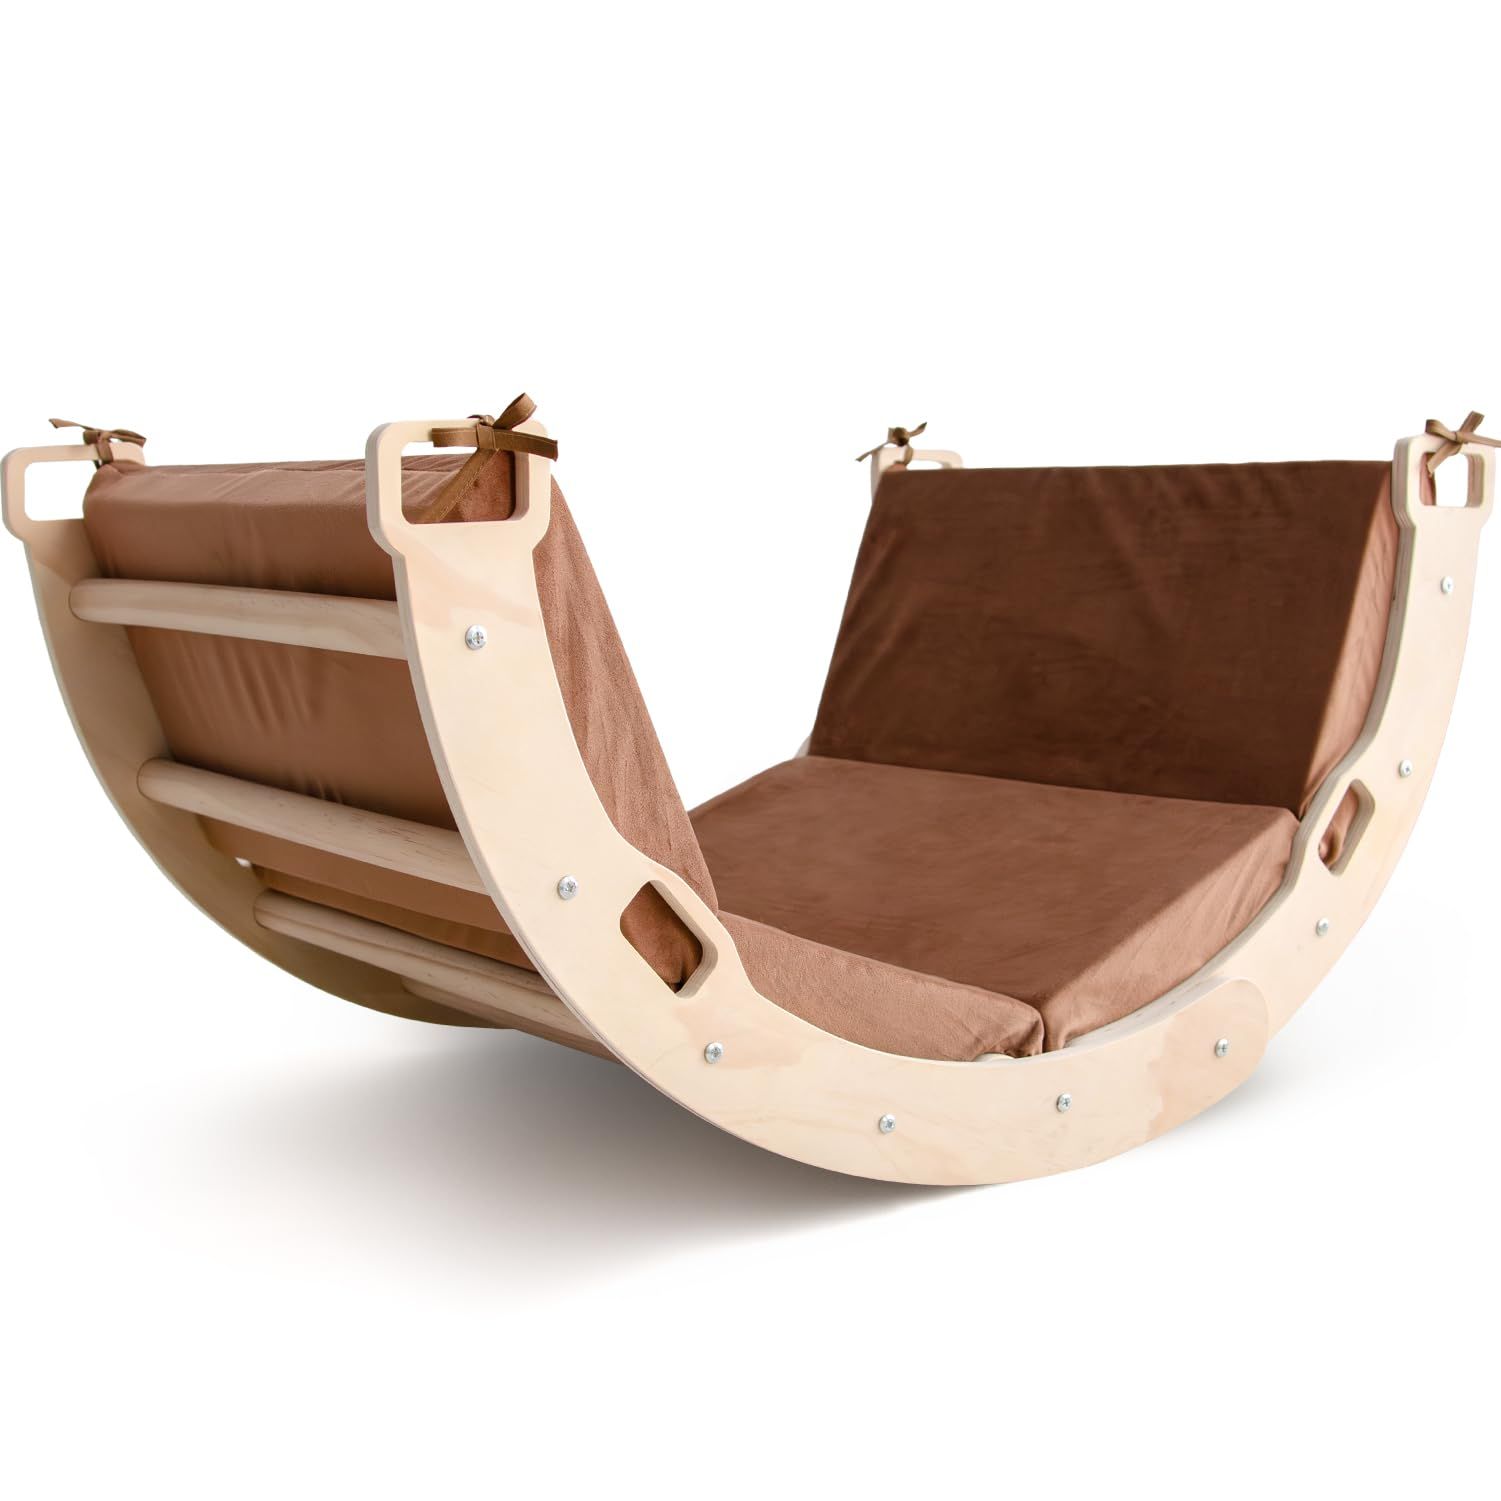 The Beauty of Kids Wooden Rocking Chairs